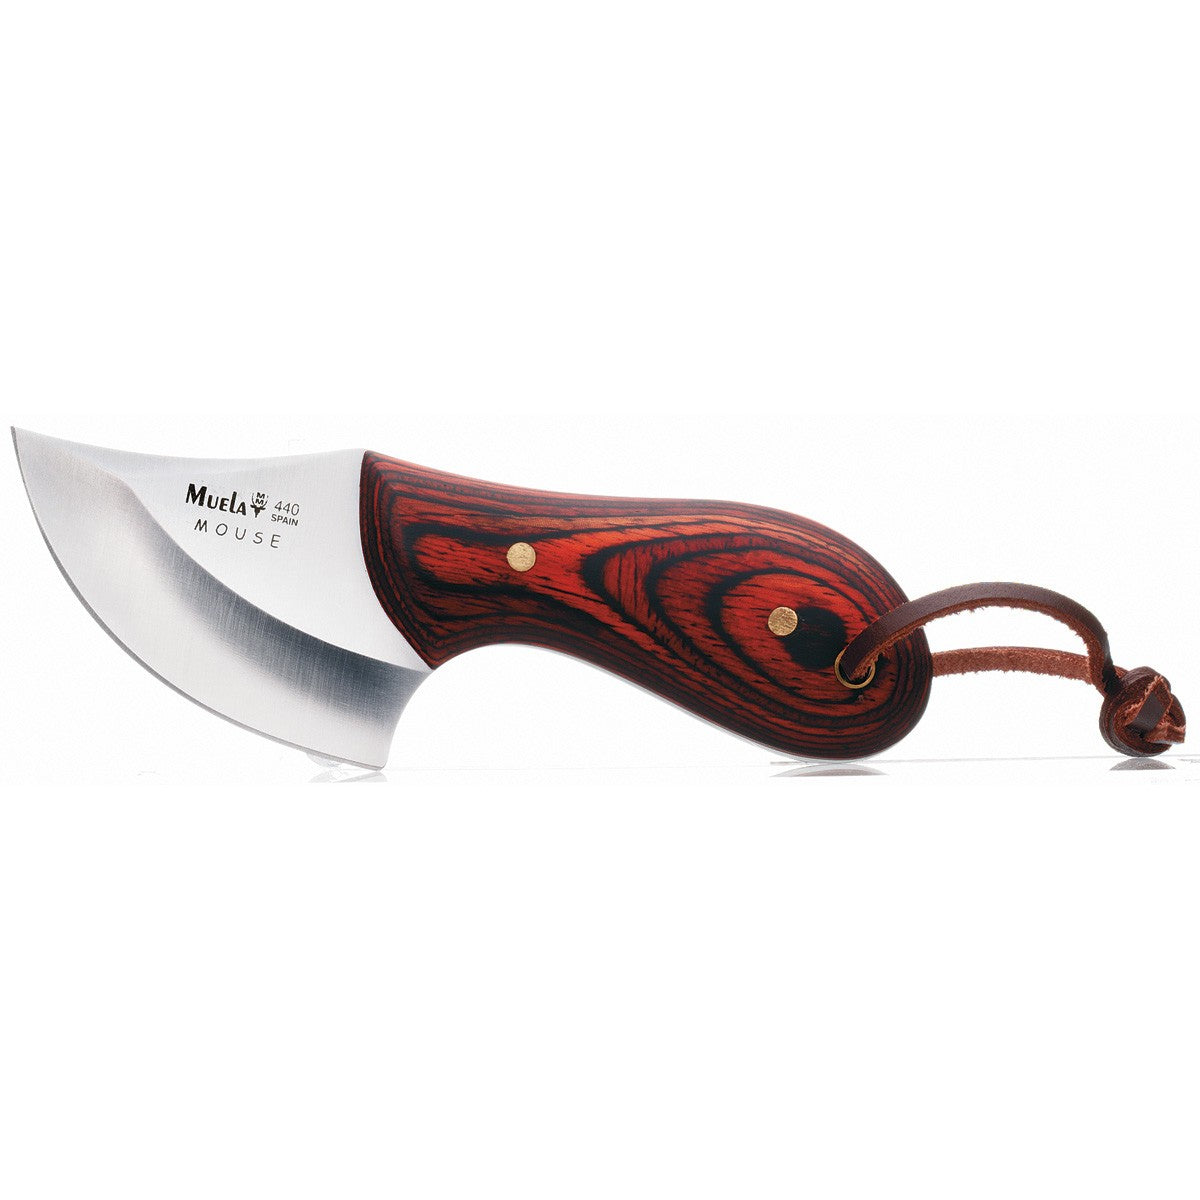 Muela | Mouse Knife 6R